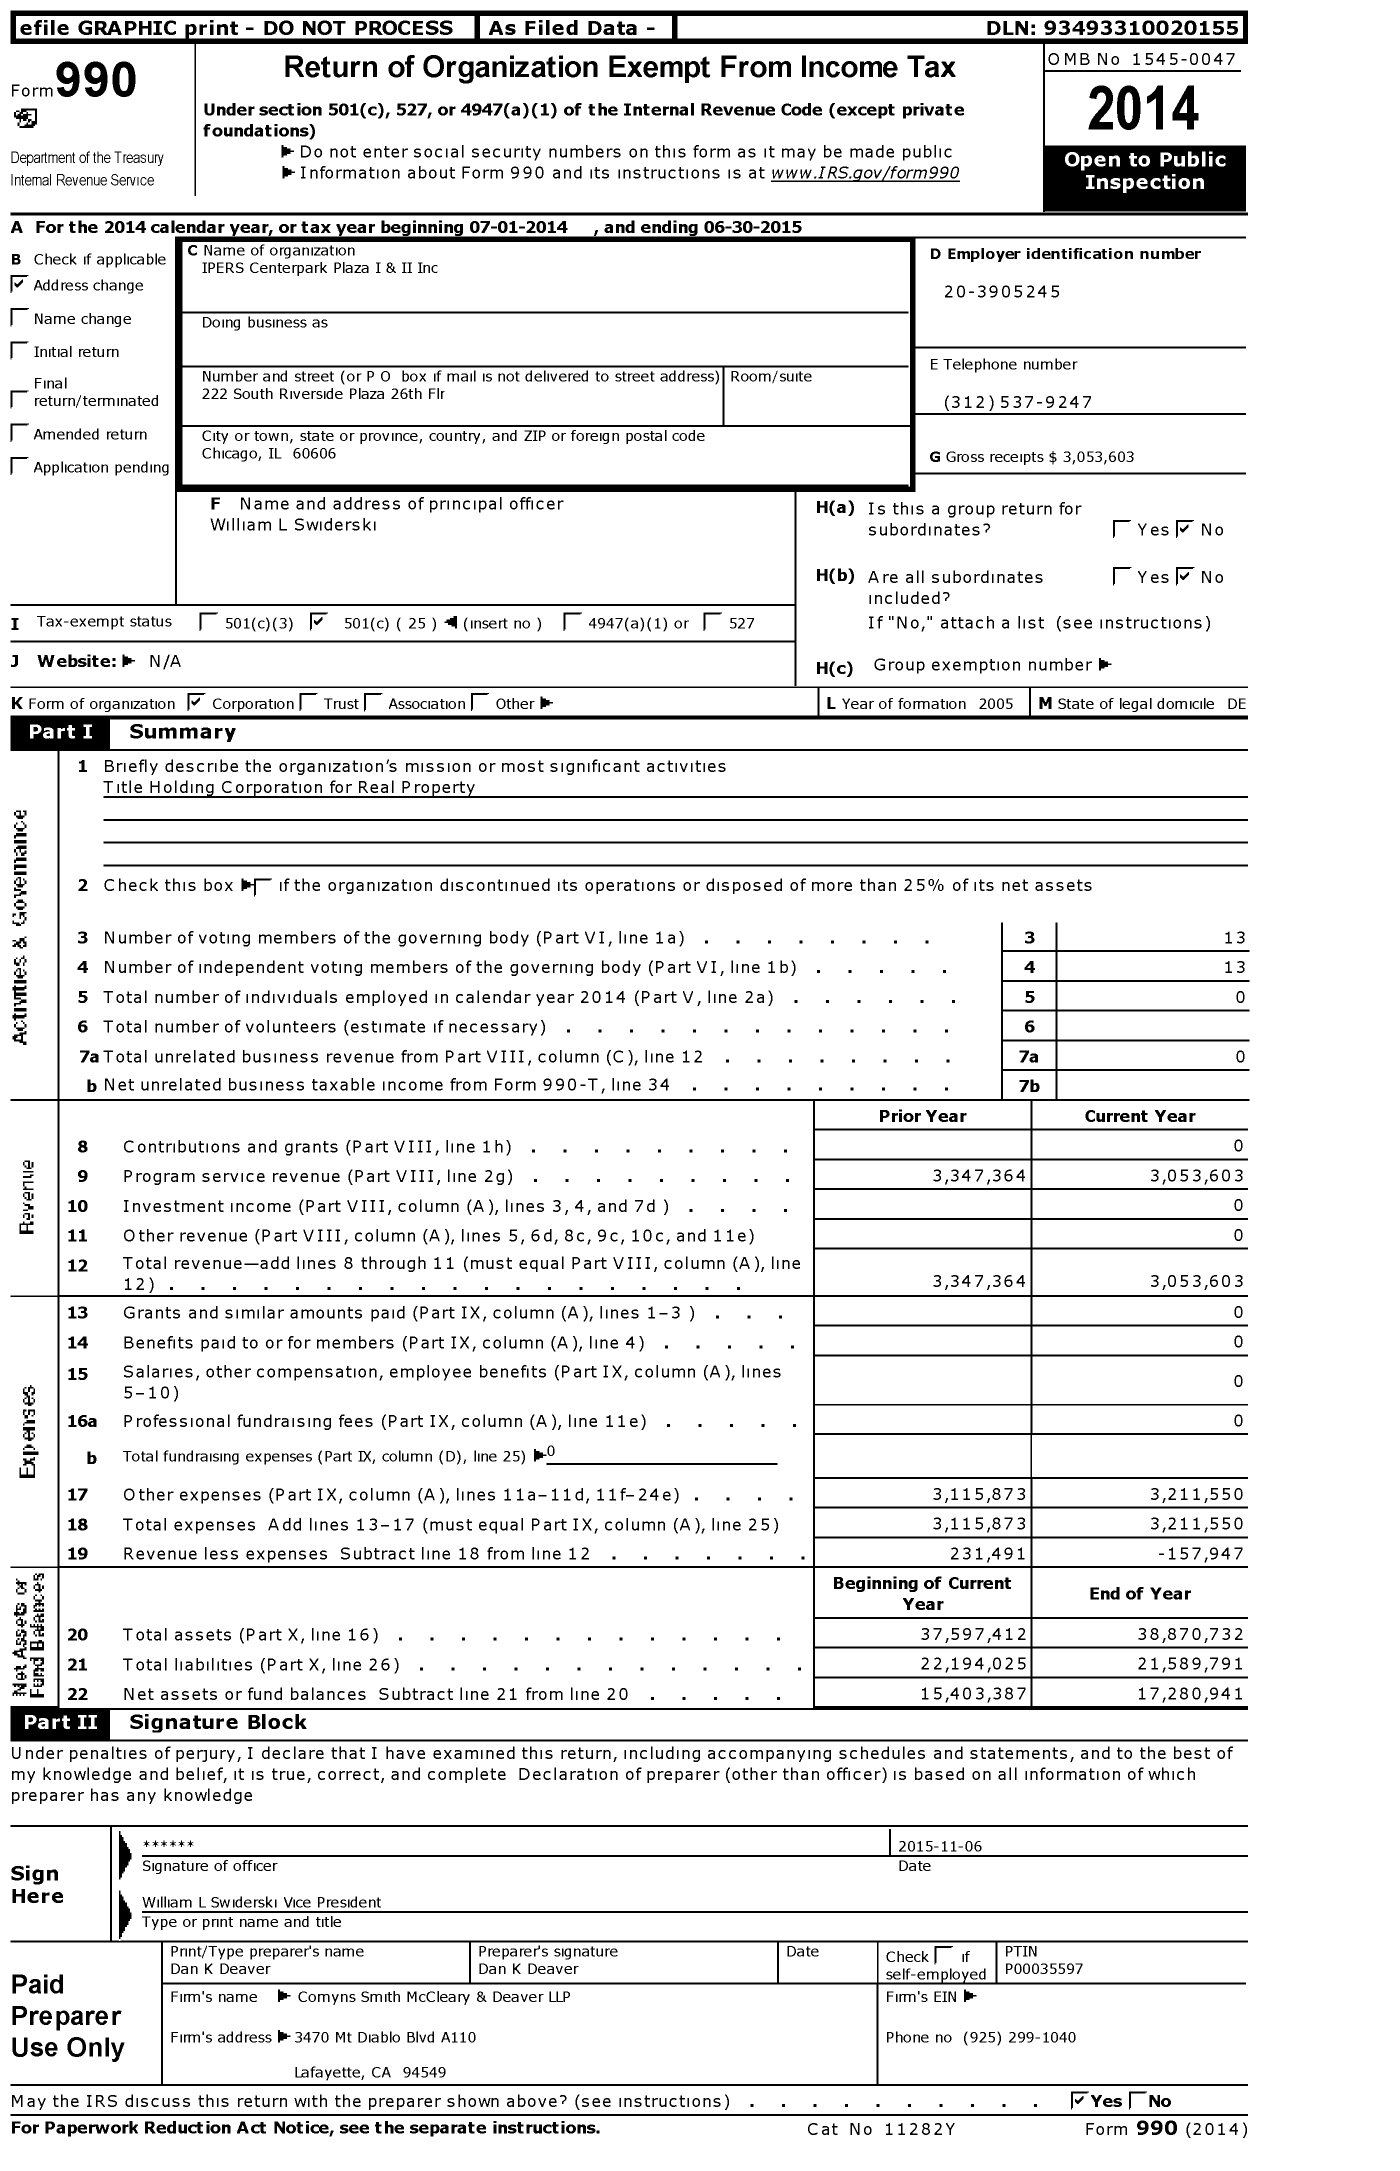 Image of first page of 2014 Form 990O for IPERS Centerpark Plaza I and II